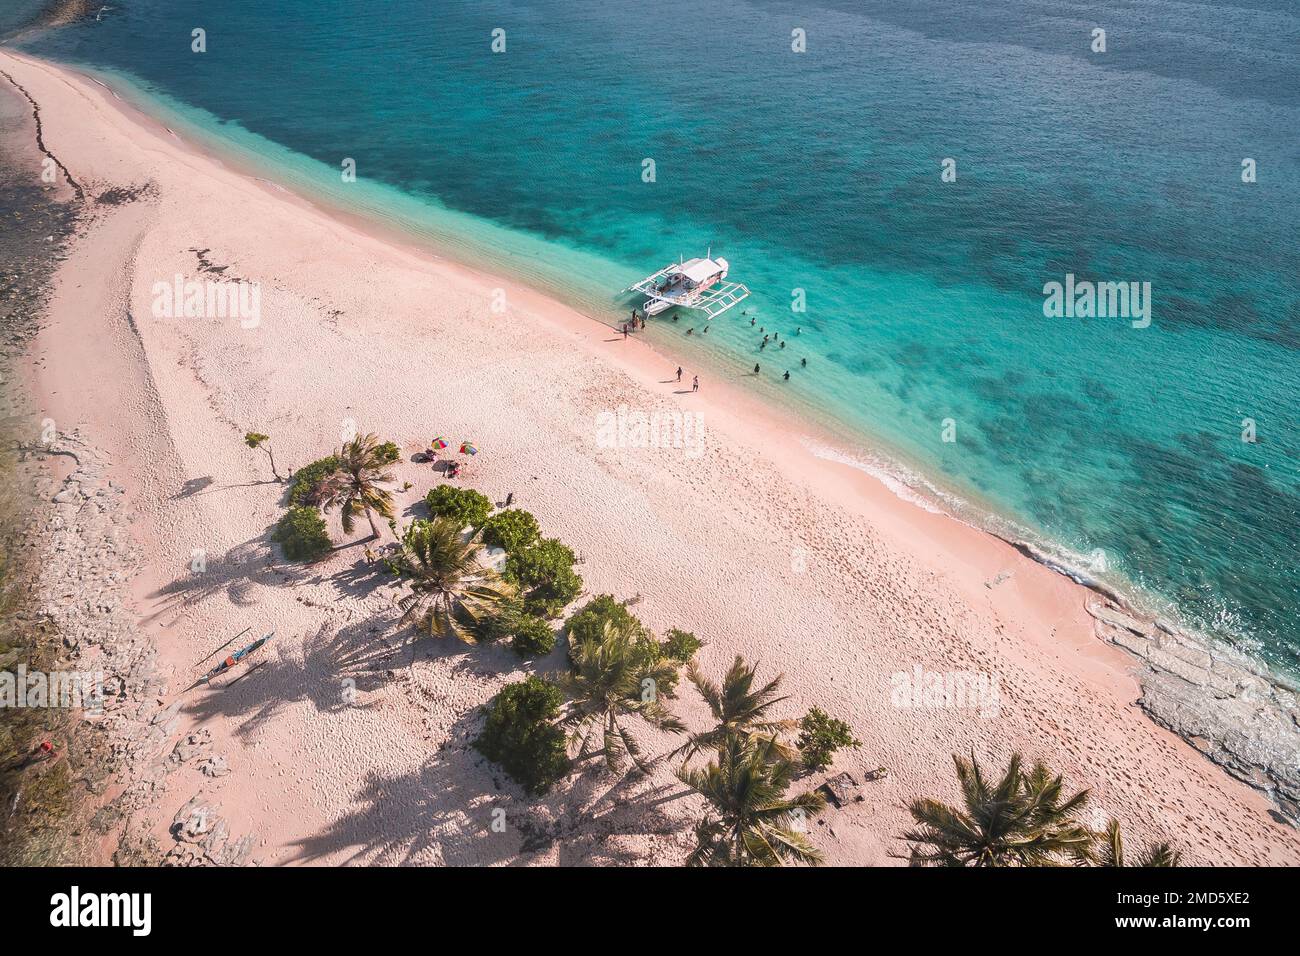 An aerial view of a beautiful white-sand beach and crystal-clear waters of Hagonoy Island Beach in San Agustin, Philippines Stock Photo